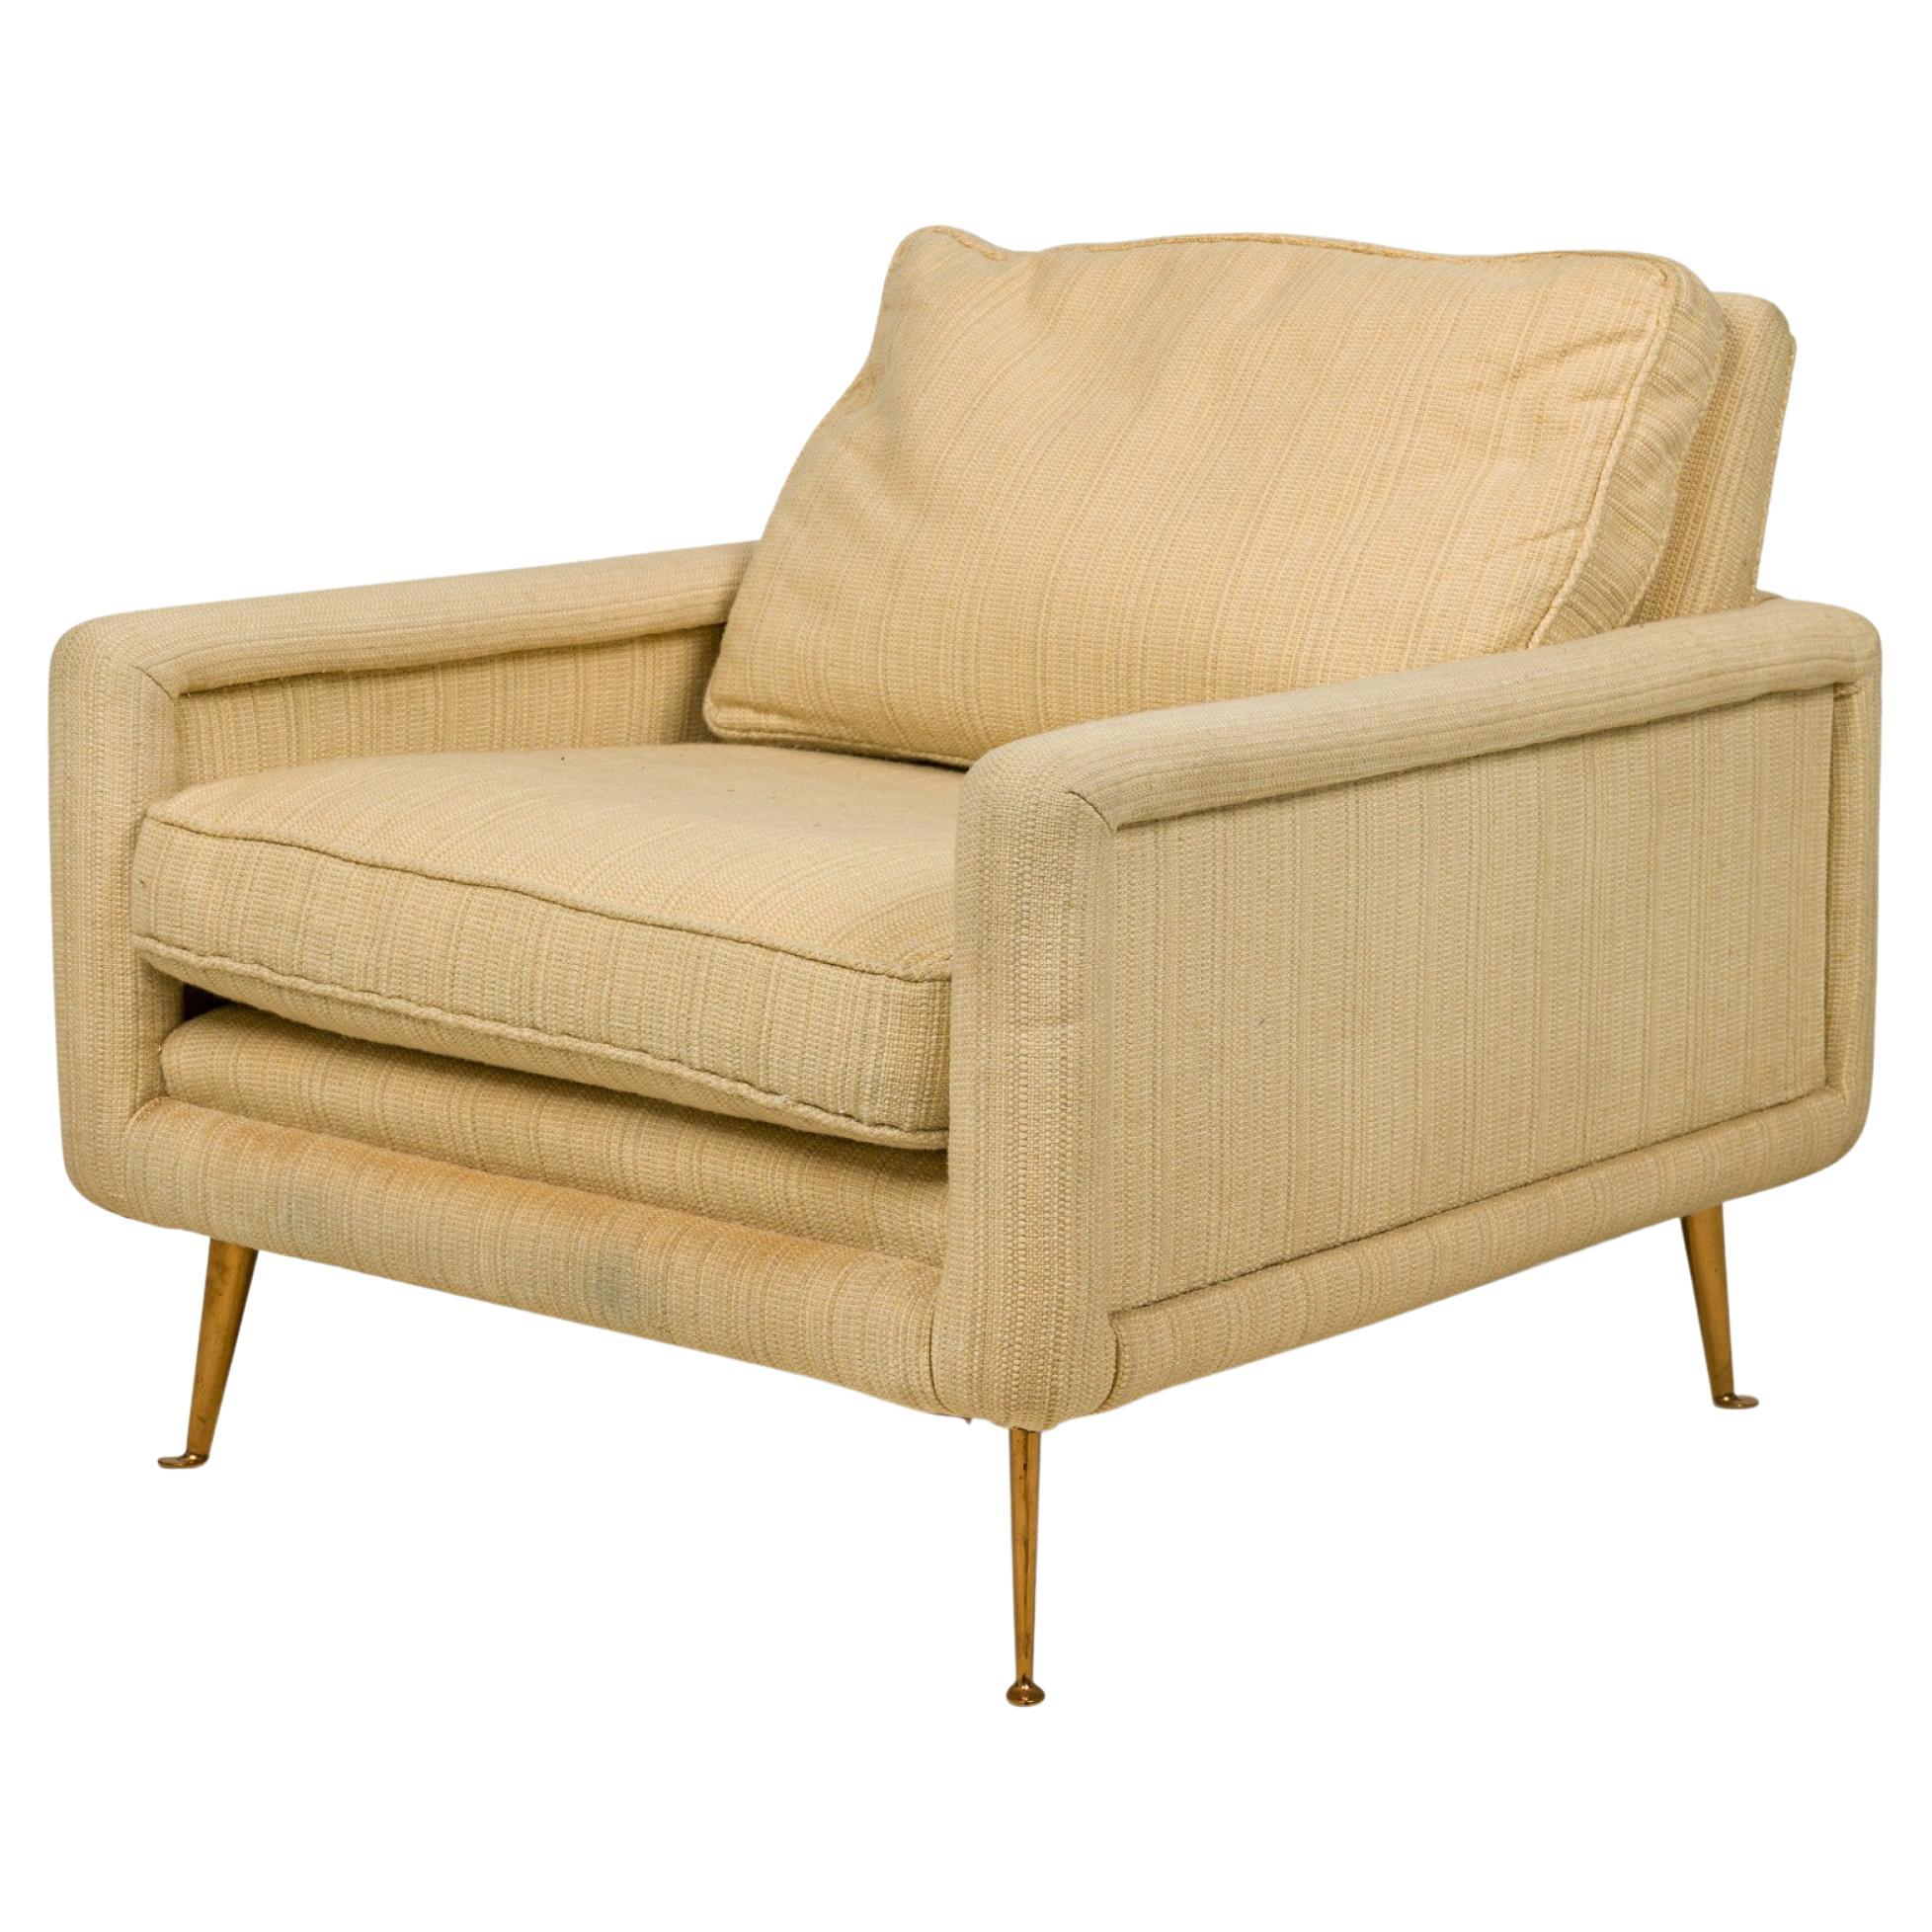 American Contemporary Beige Fabric Upholstered Bronze Leg Lounge / Armchair For Sale